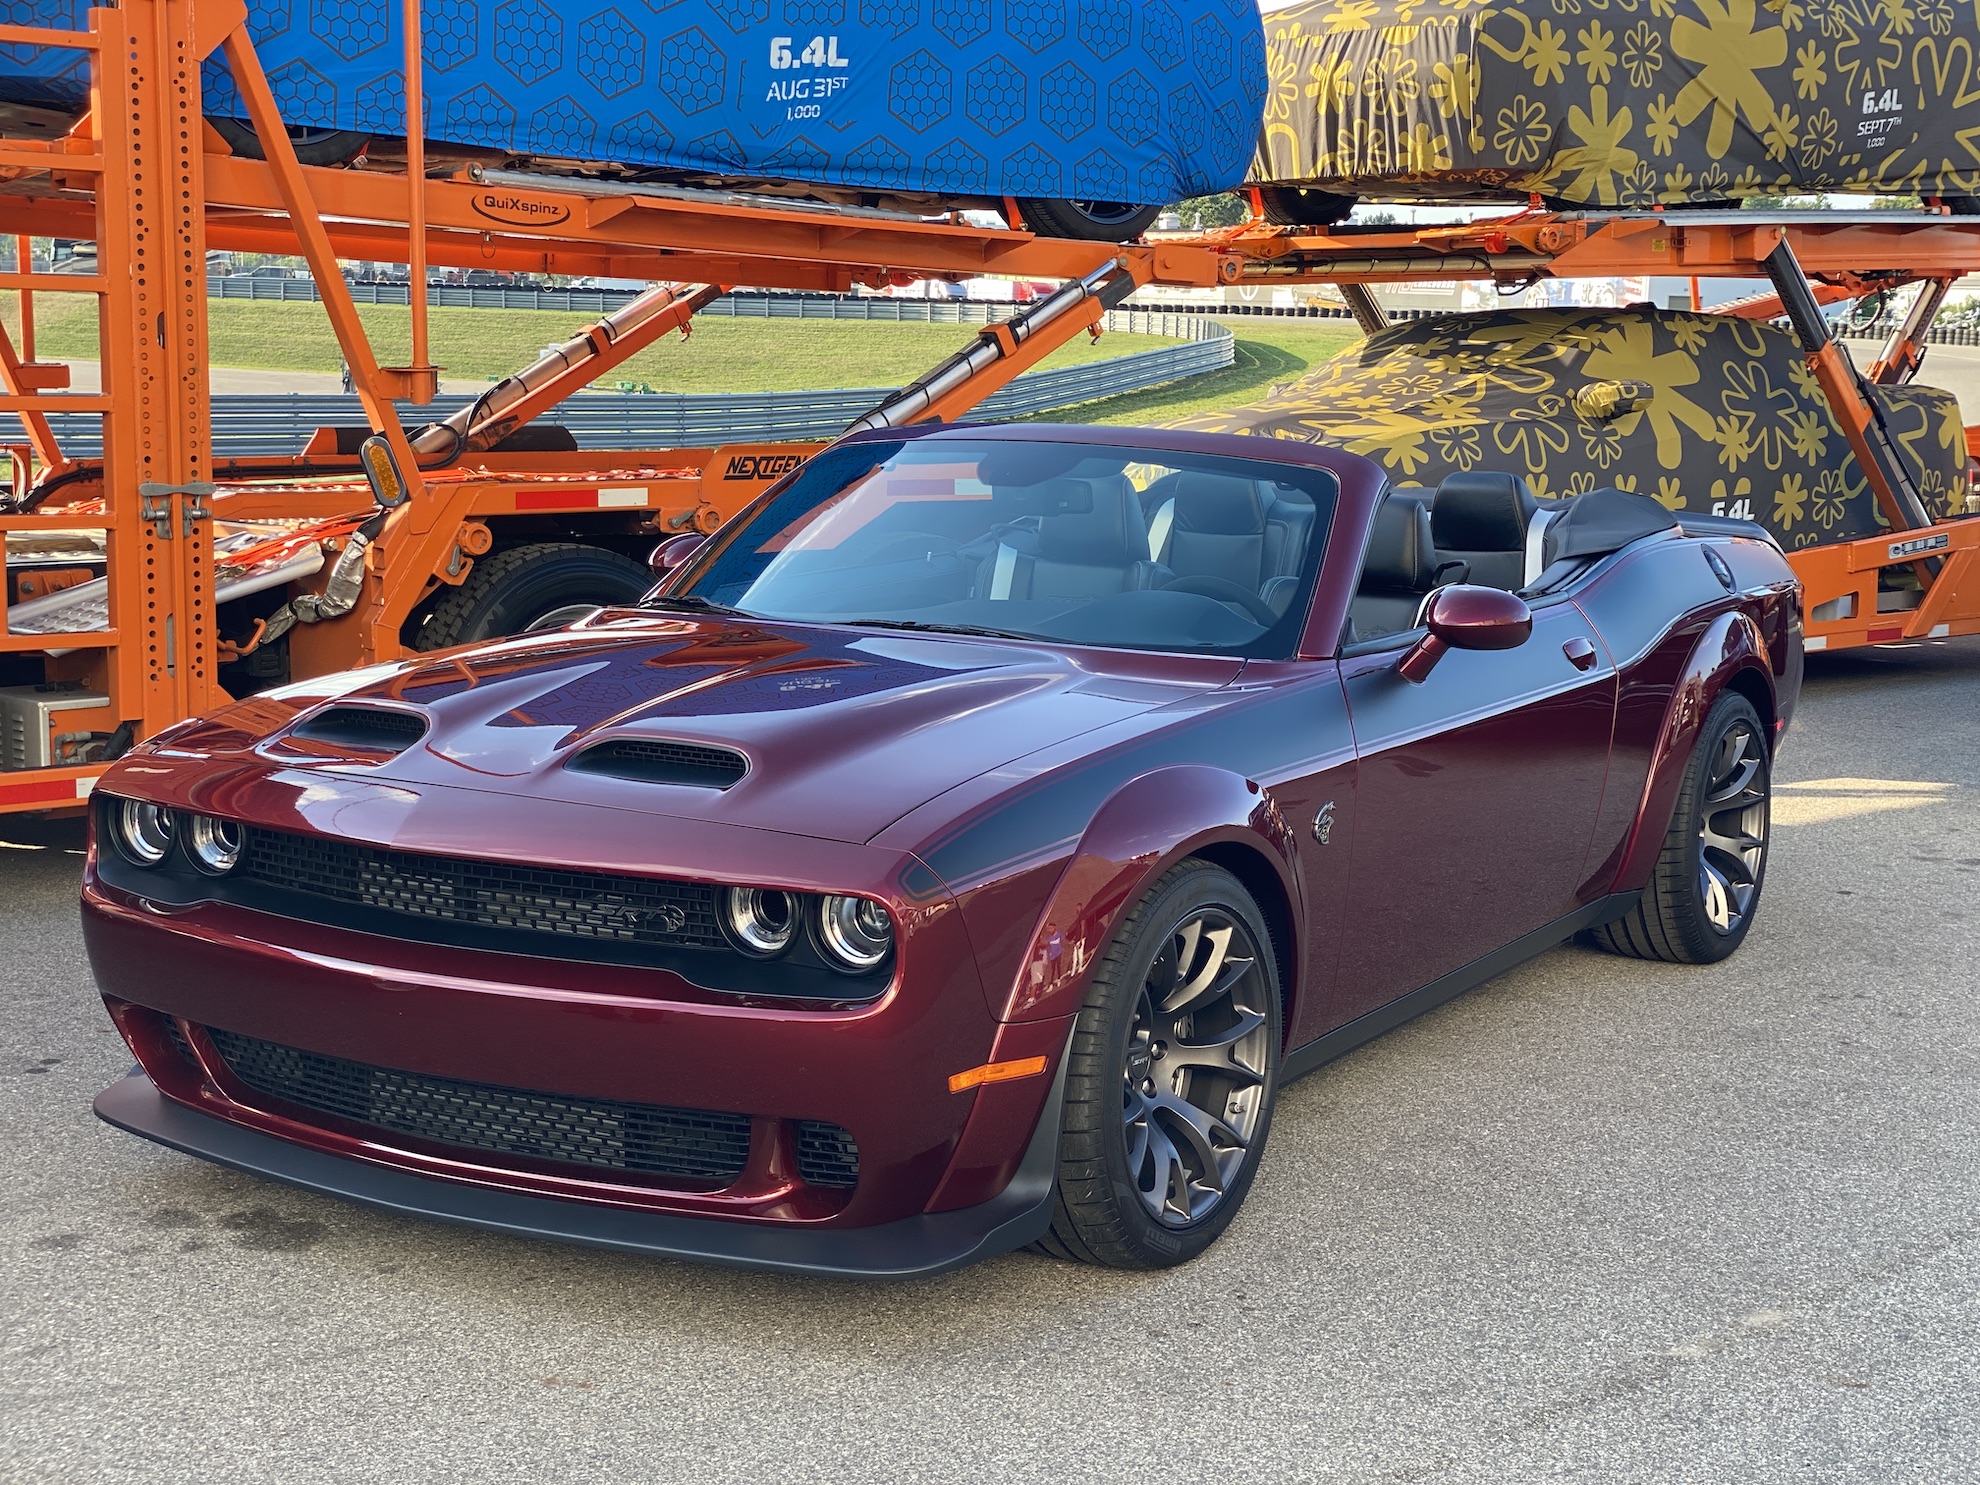 Dodge dealers working with coachbuilder to offer Challenger convertibles